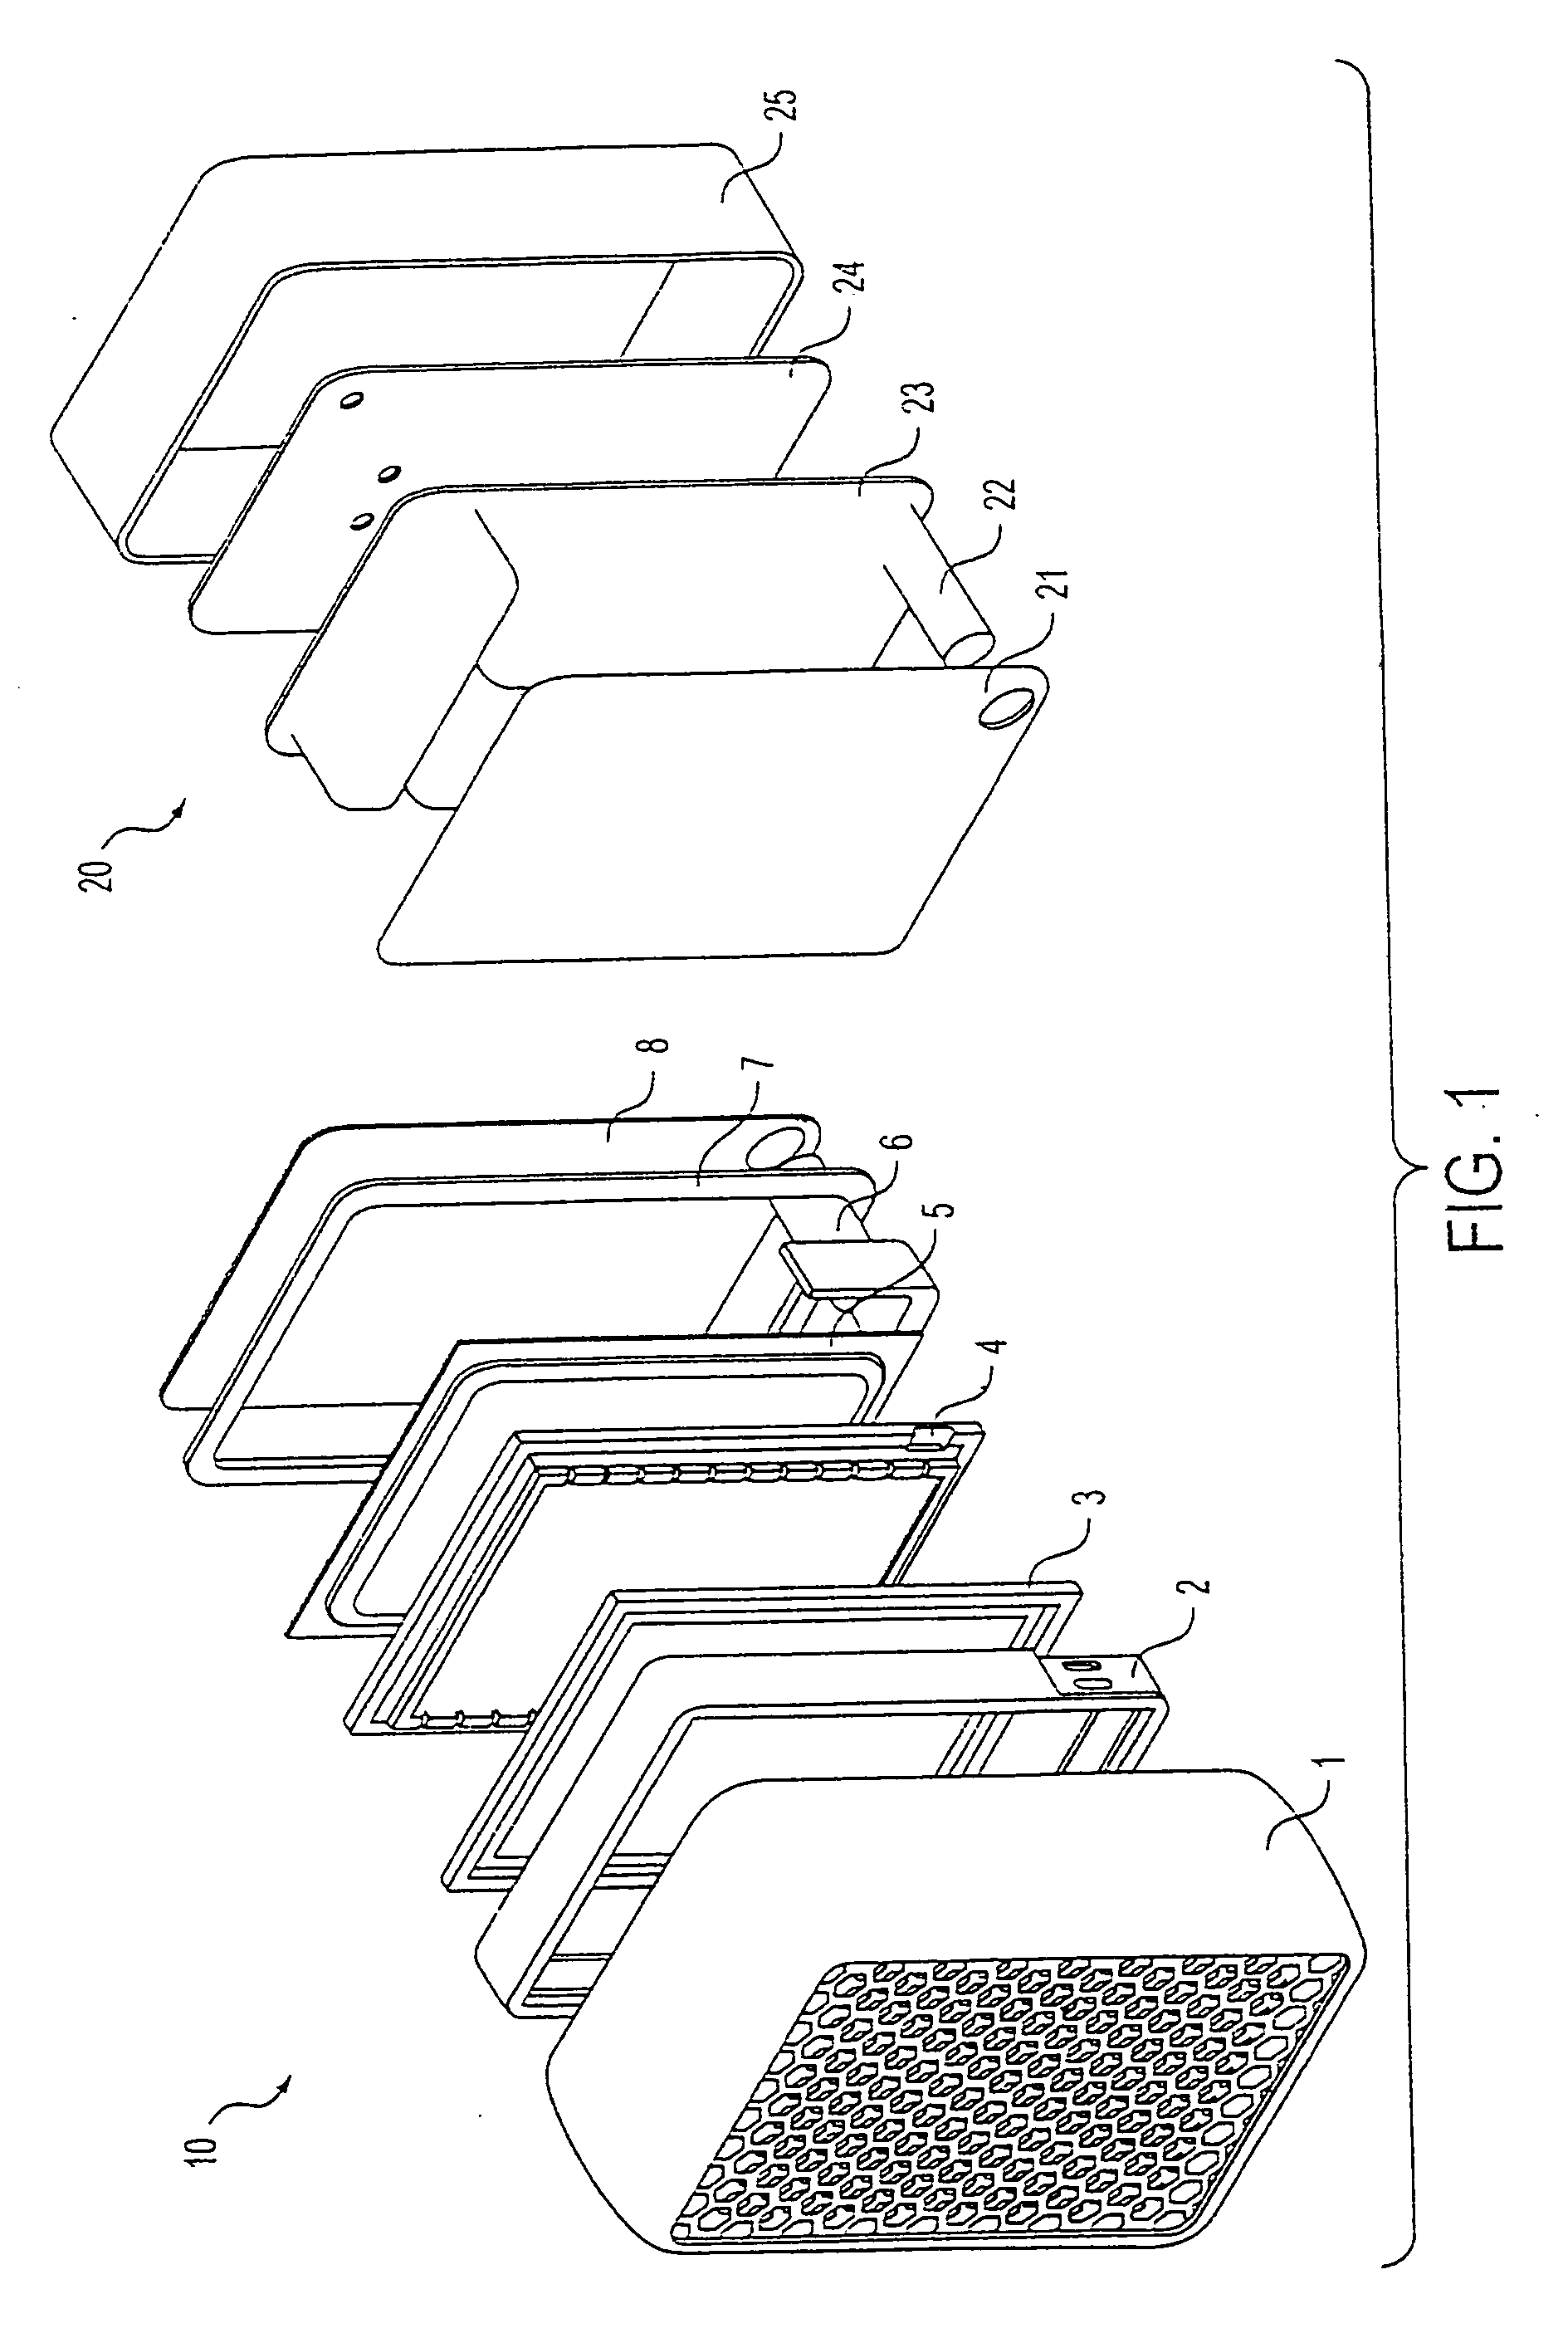 Disposable fuel cell with and without cartridge and method of making and using the fuel cell and cartridge